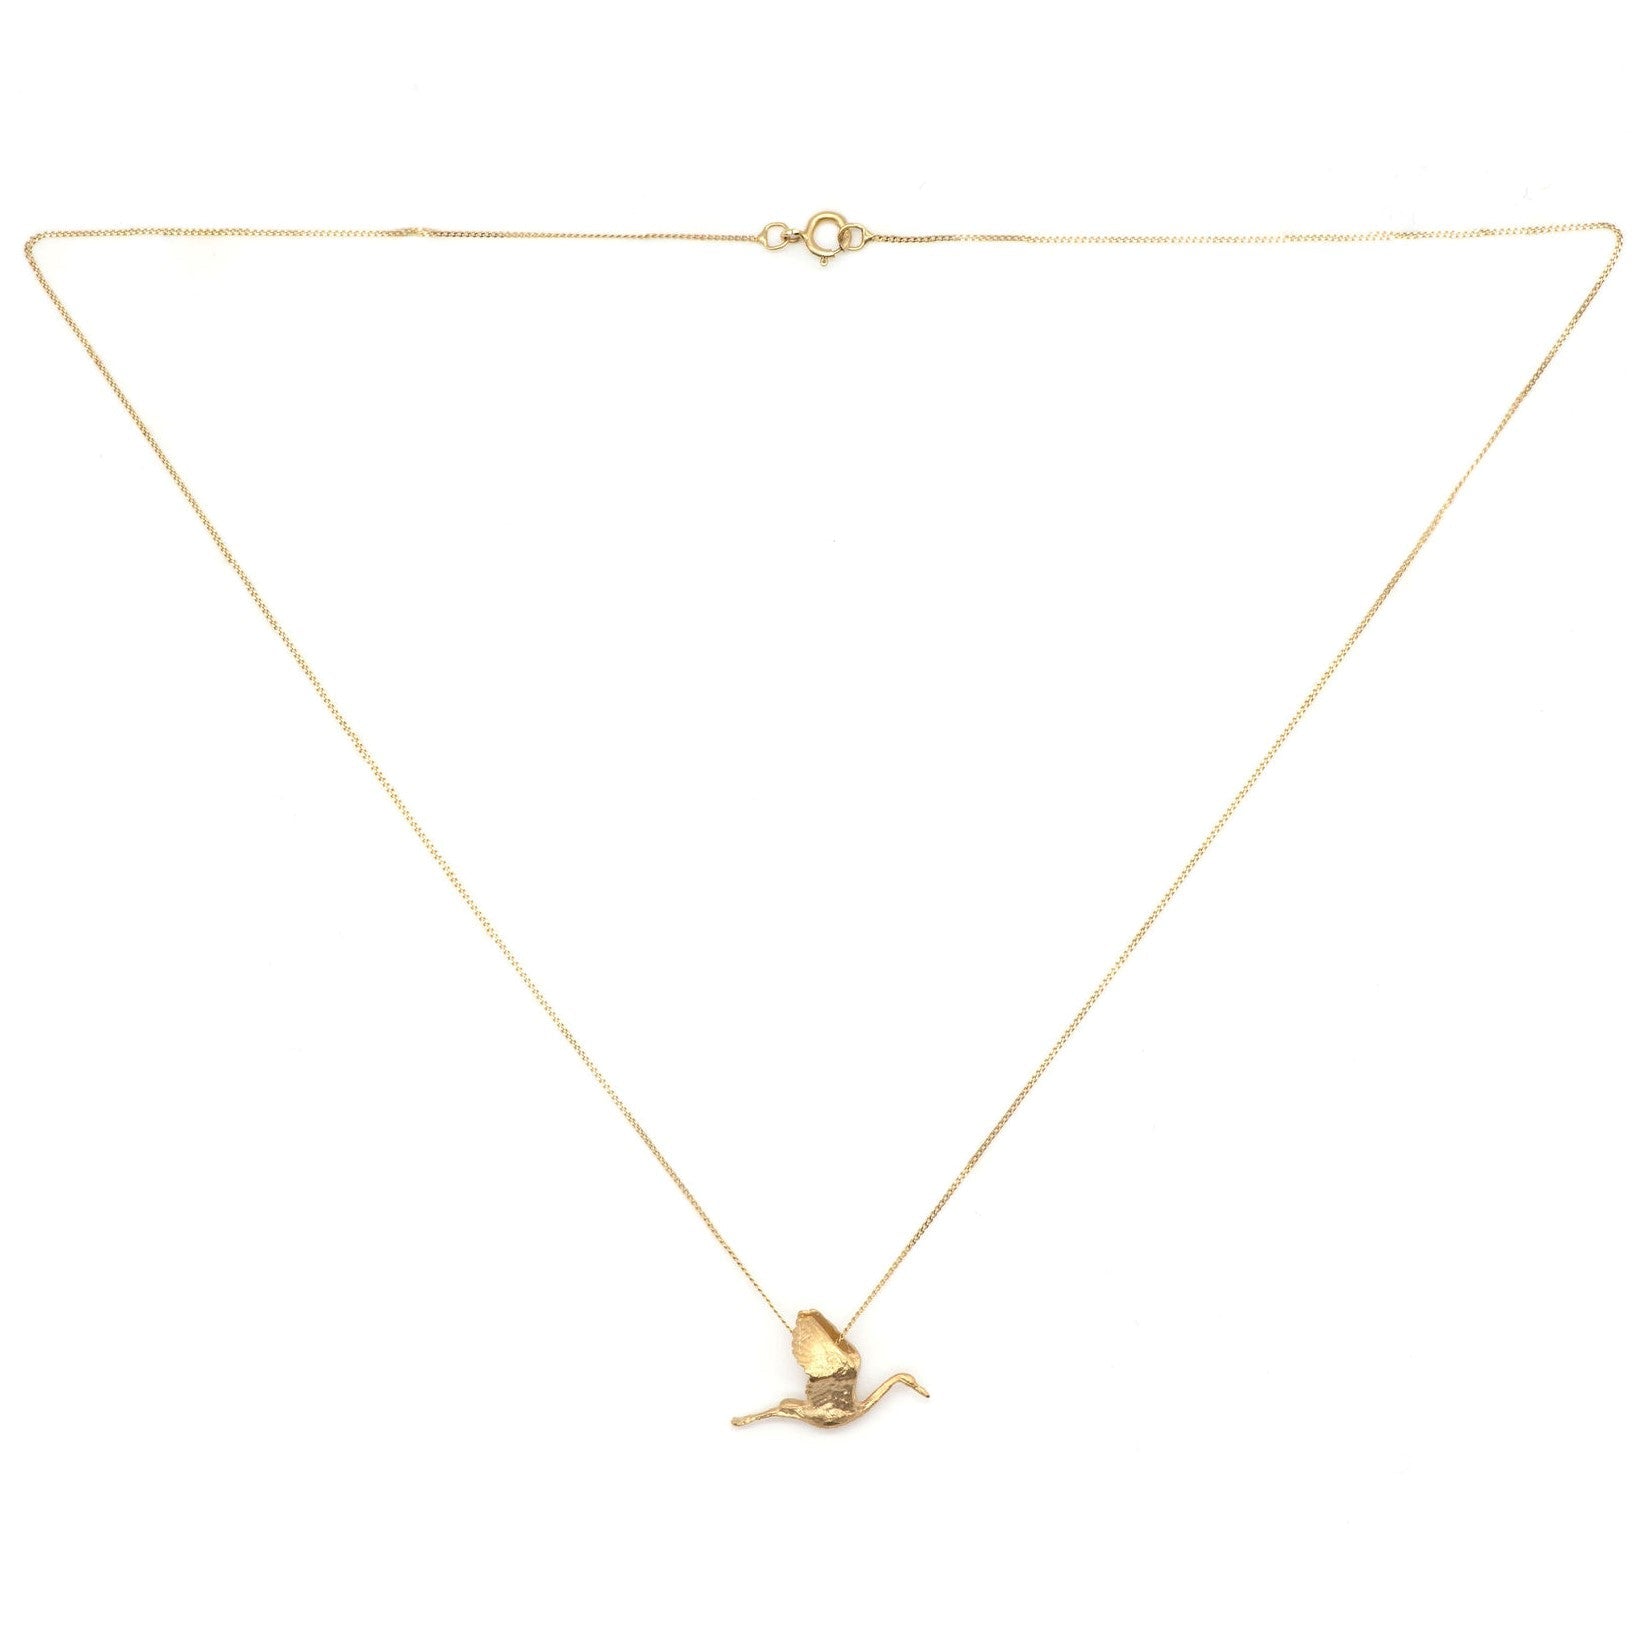 Solid Gold 'Stork' Necklace - Dainty London